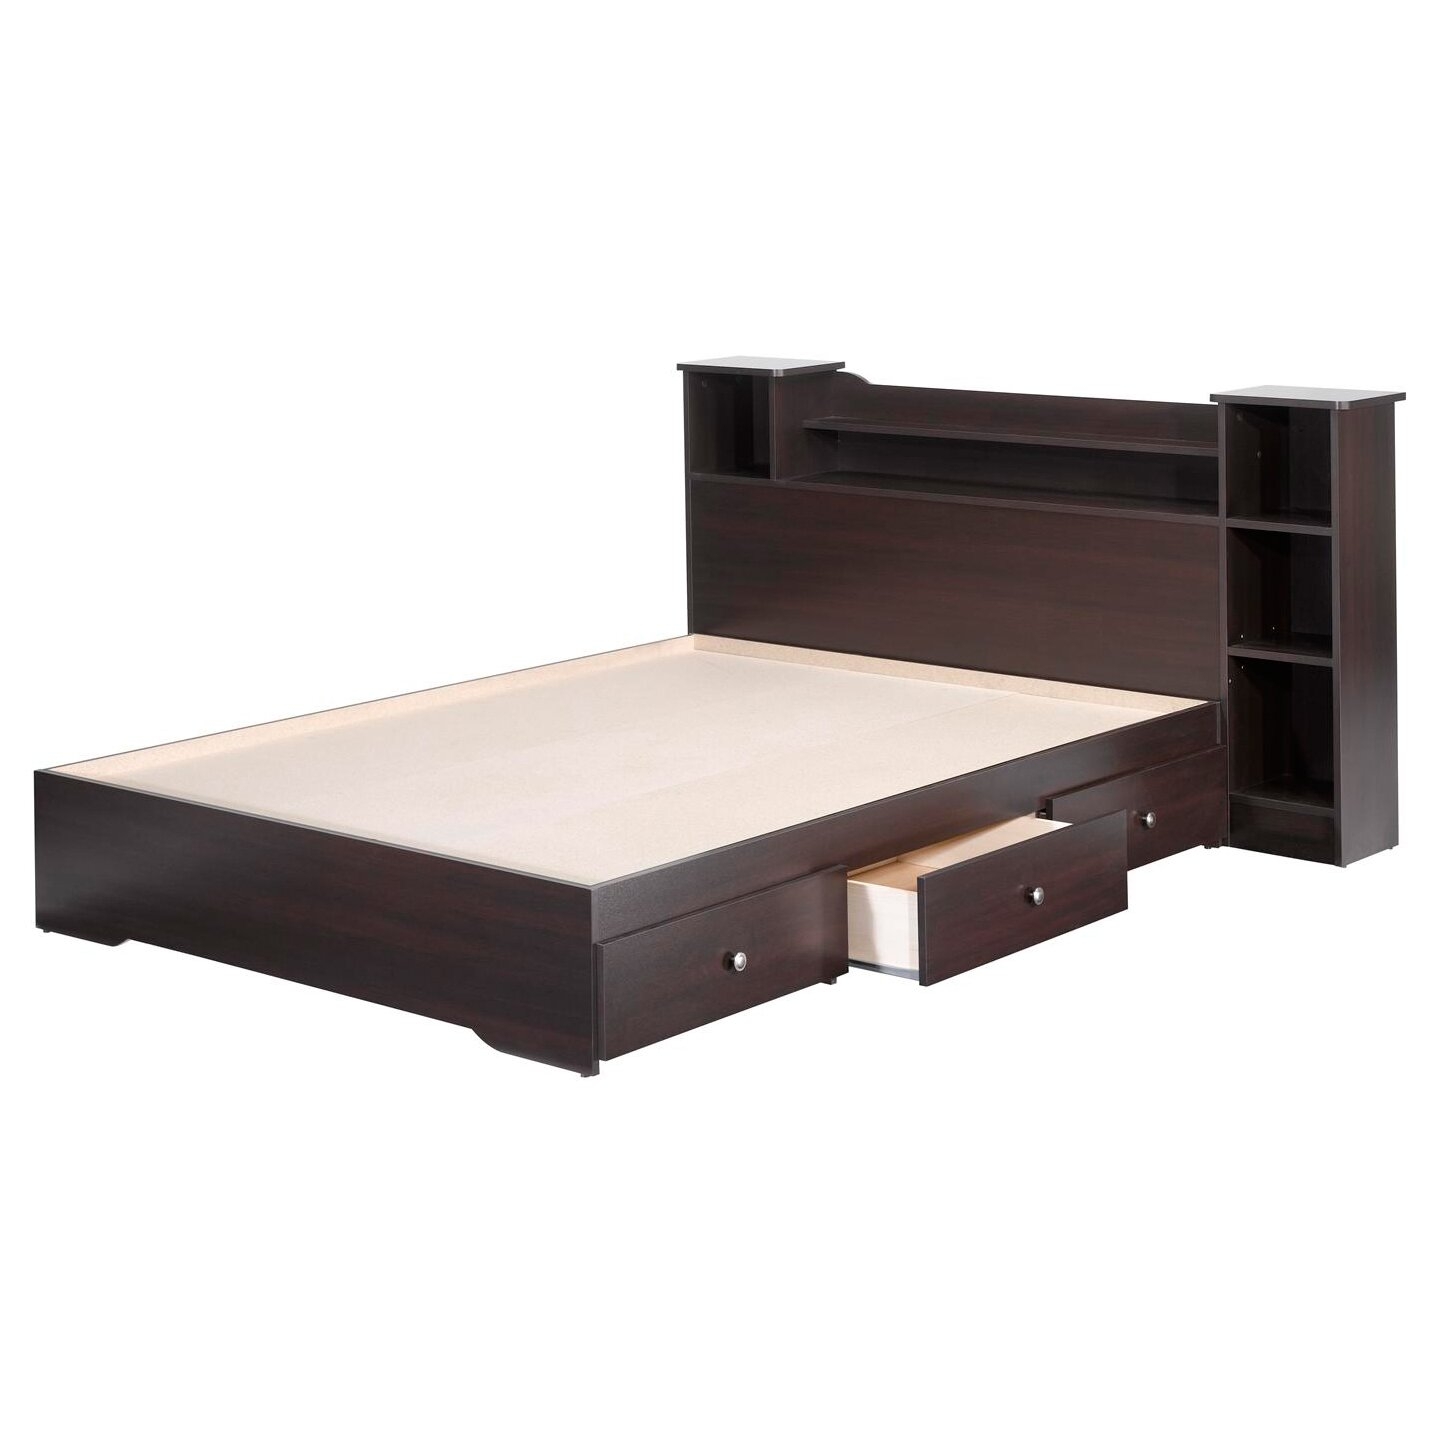 Full size platform bed with drawers